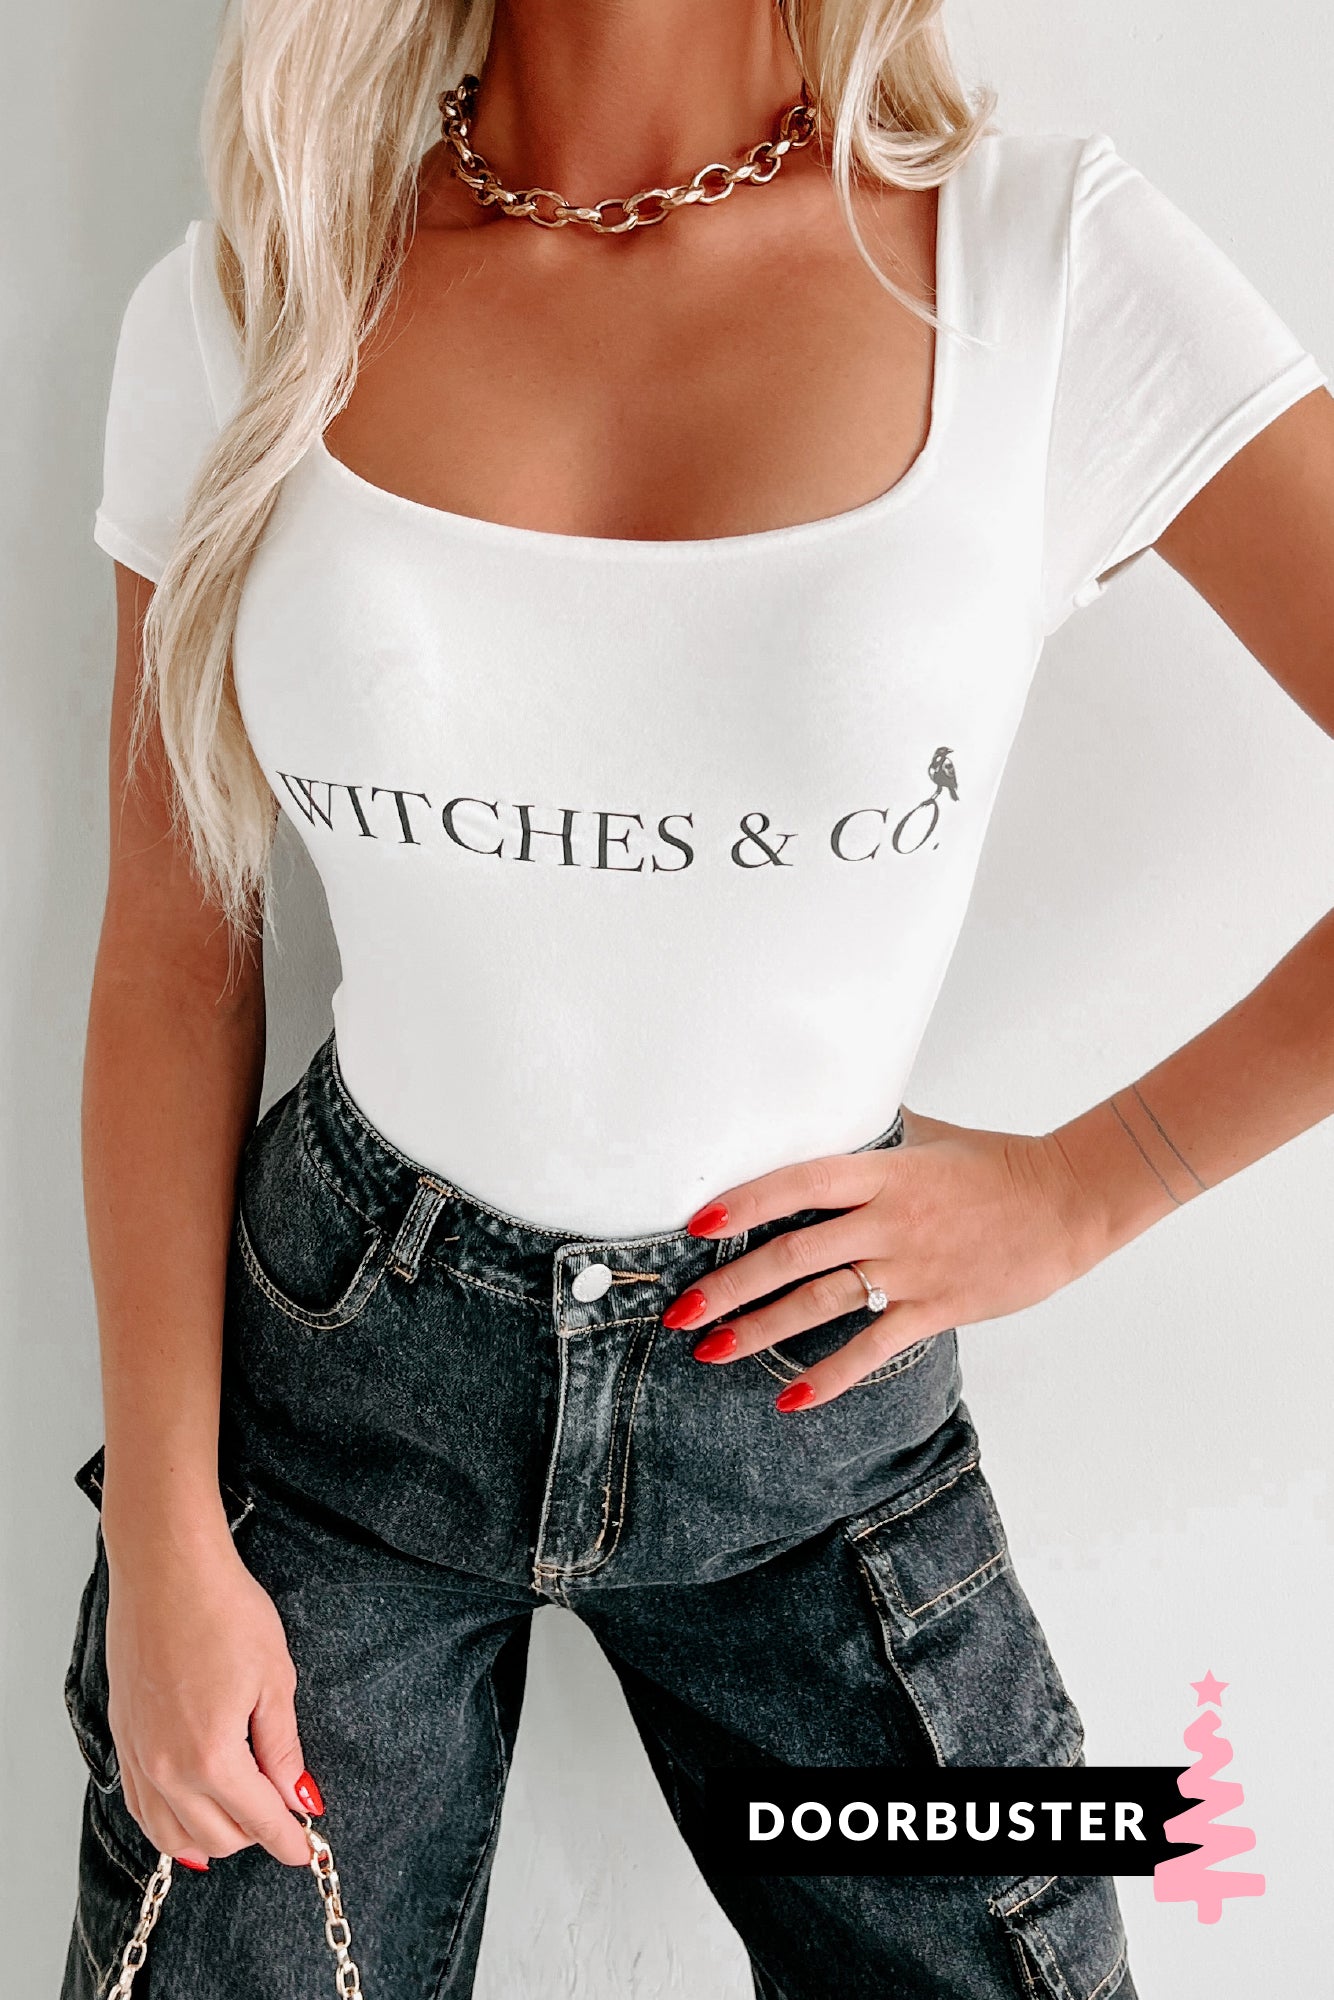 Doorbuster "Witches & Co." Short Sleeve Square Neck Graphic Bodysuit (White) - Print On Demand - NanaMacs